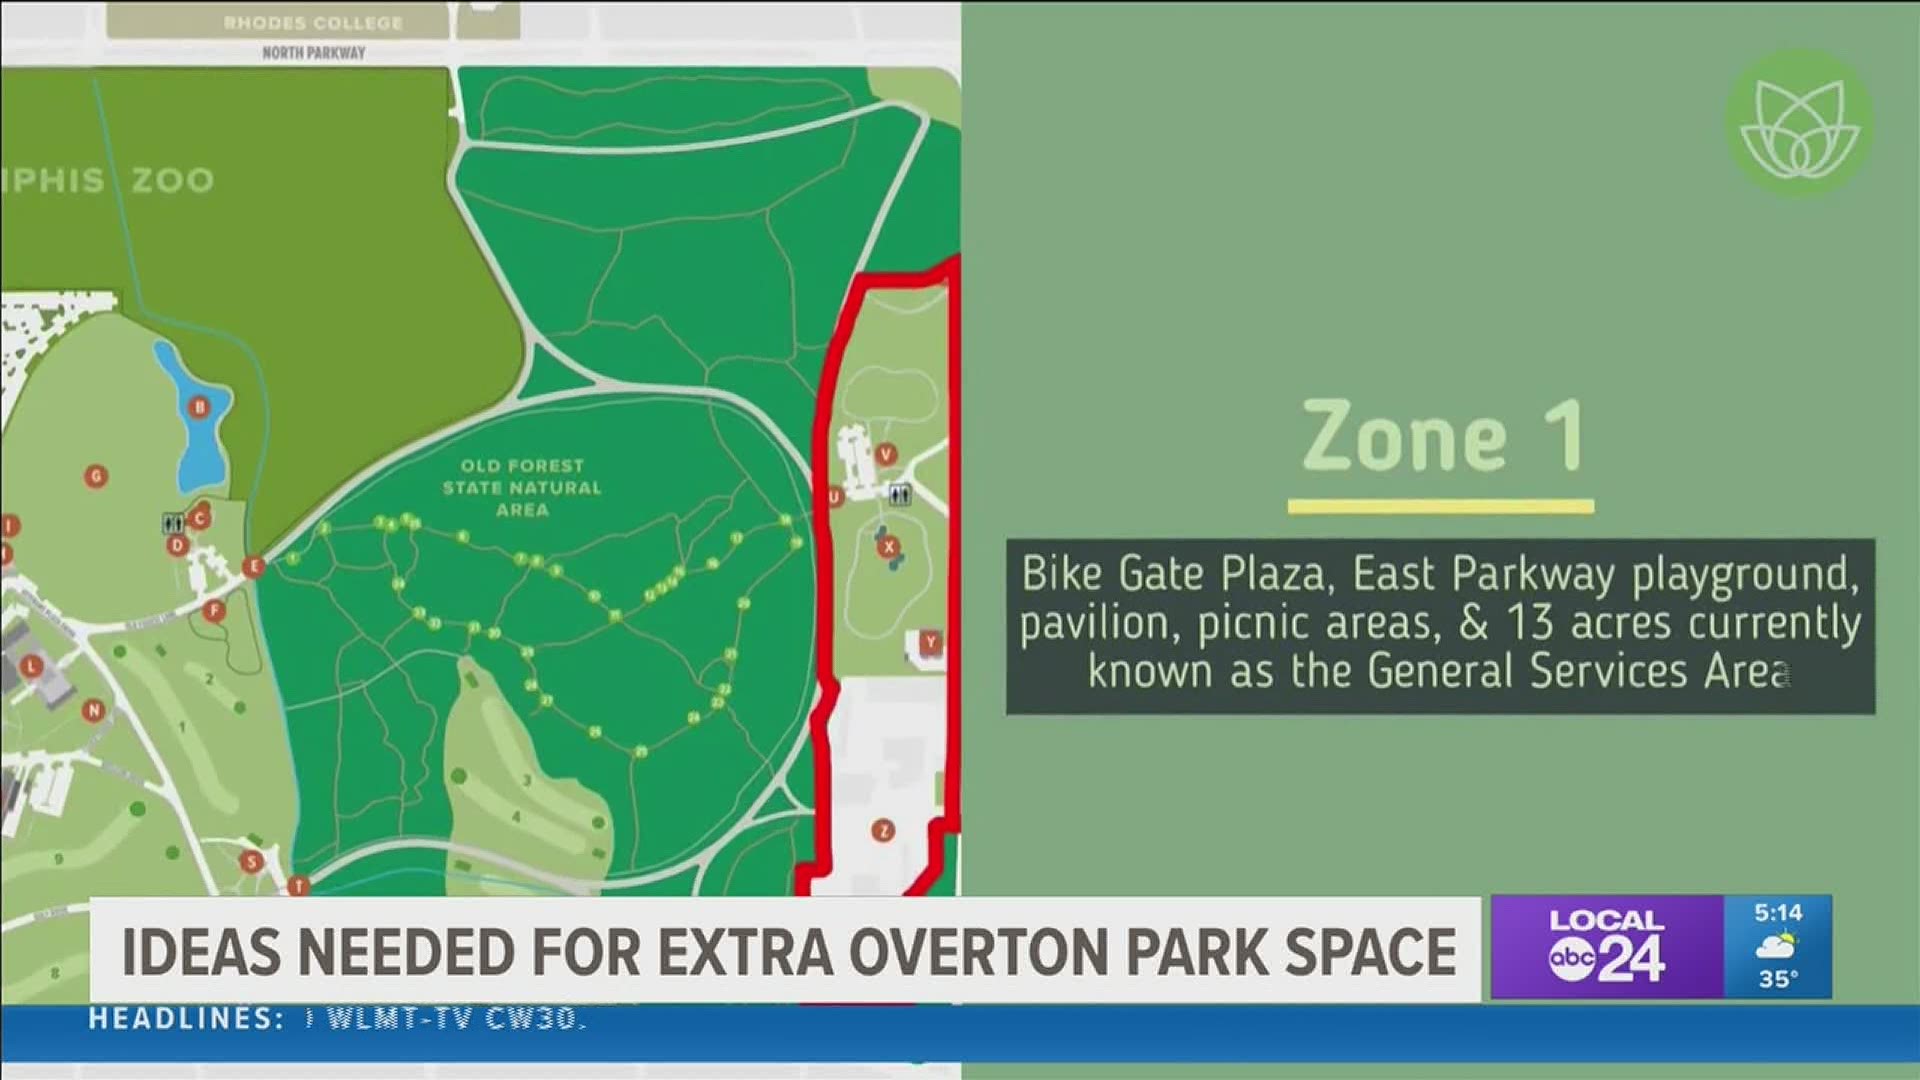 13 acres of land will be developed for public use on the southeast side of Overton Park.